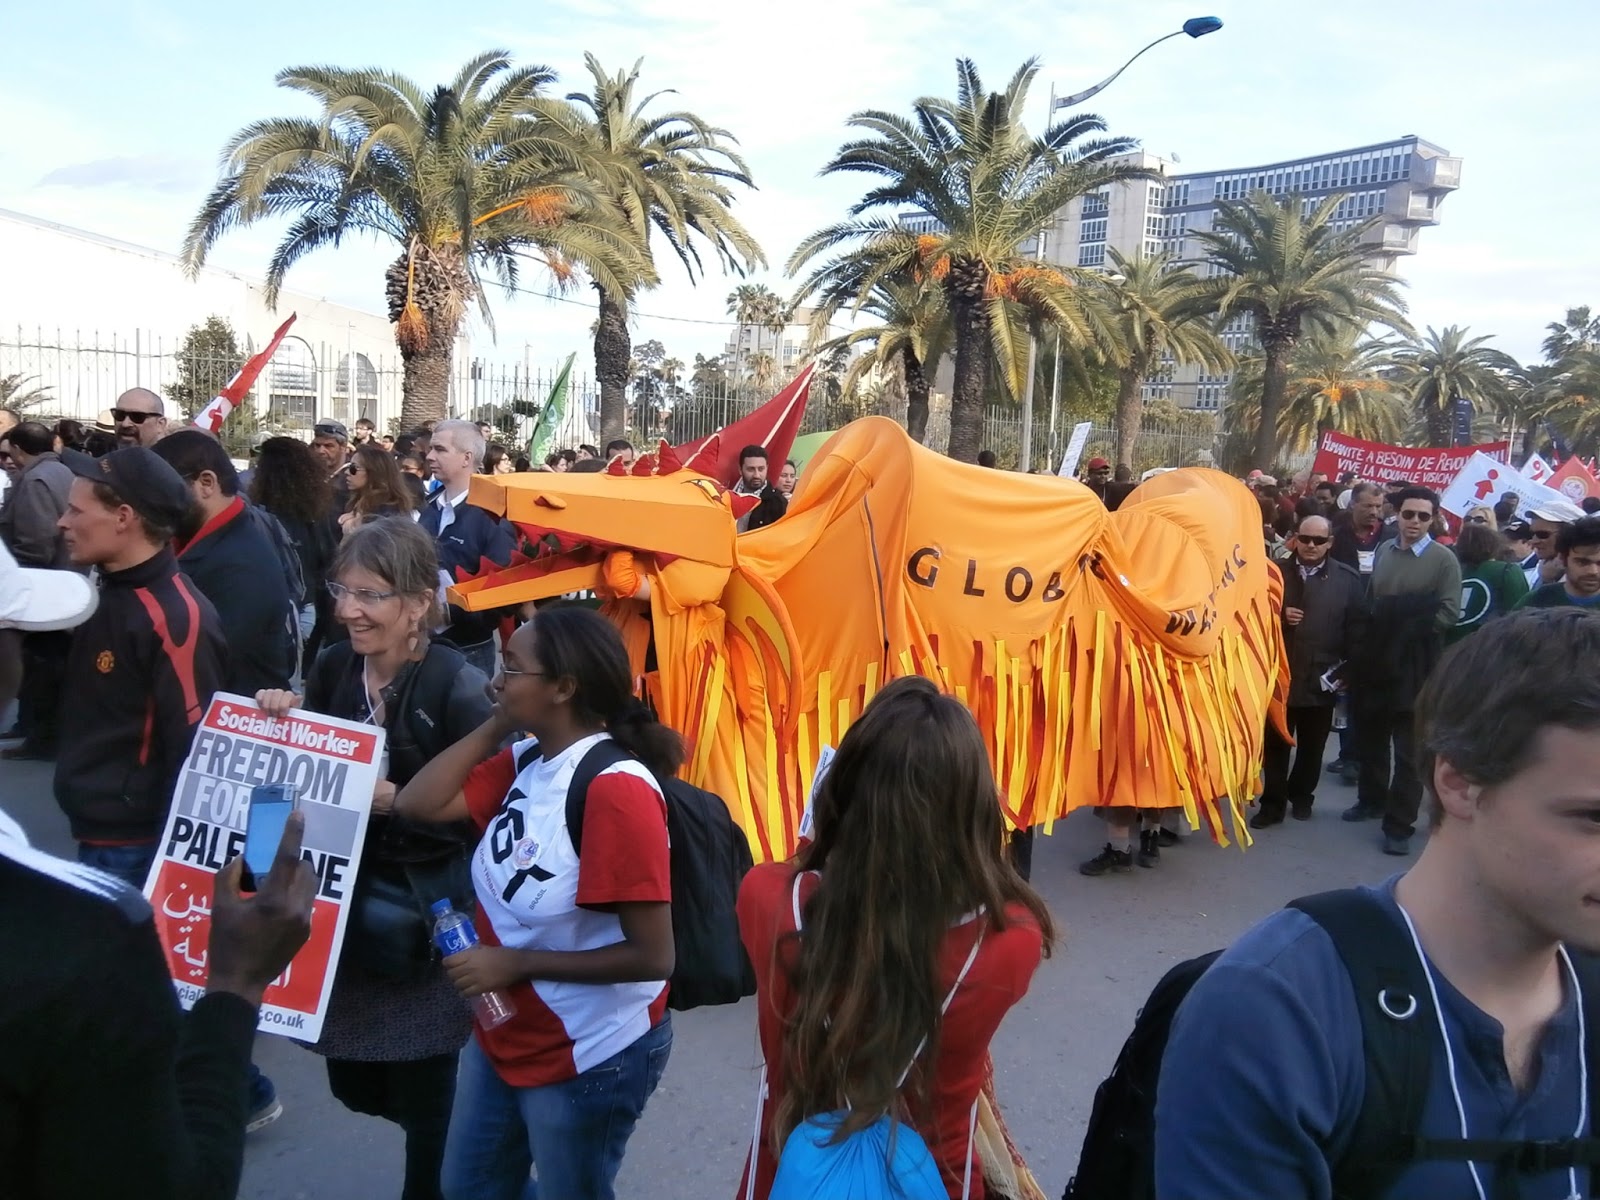 Example on the demonstrations diversity: Global warming dragon in front.